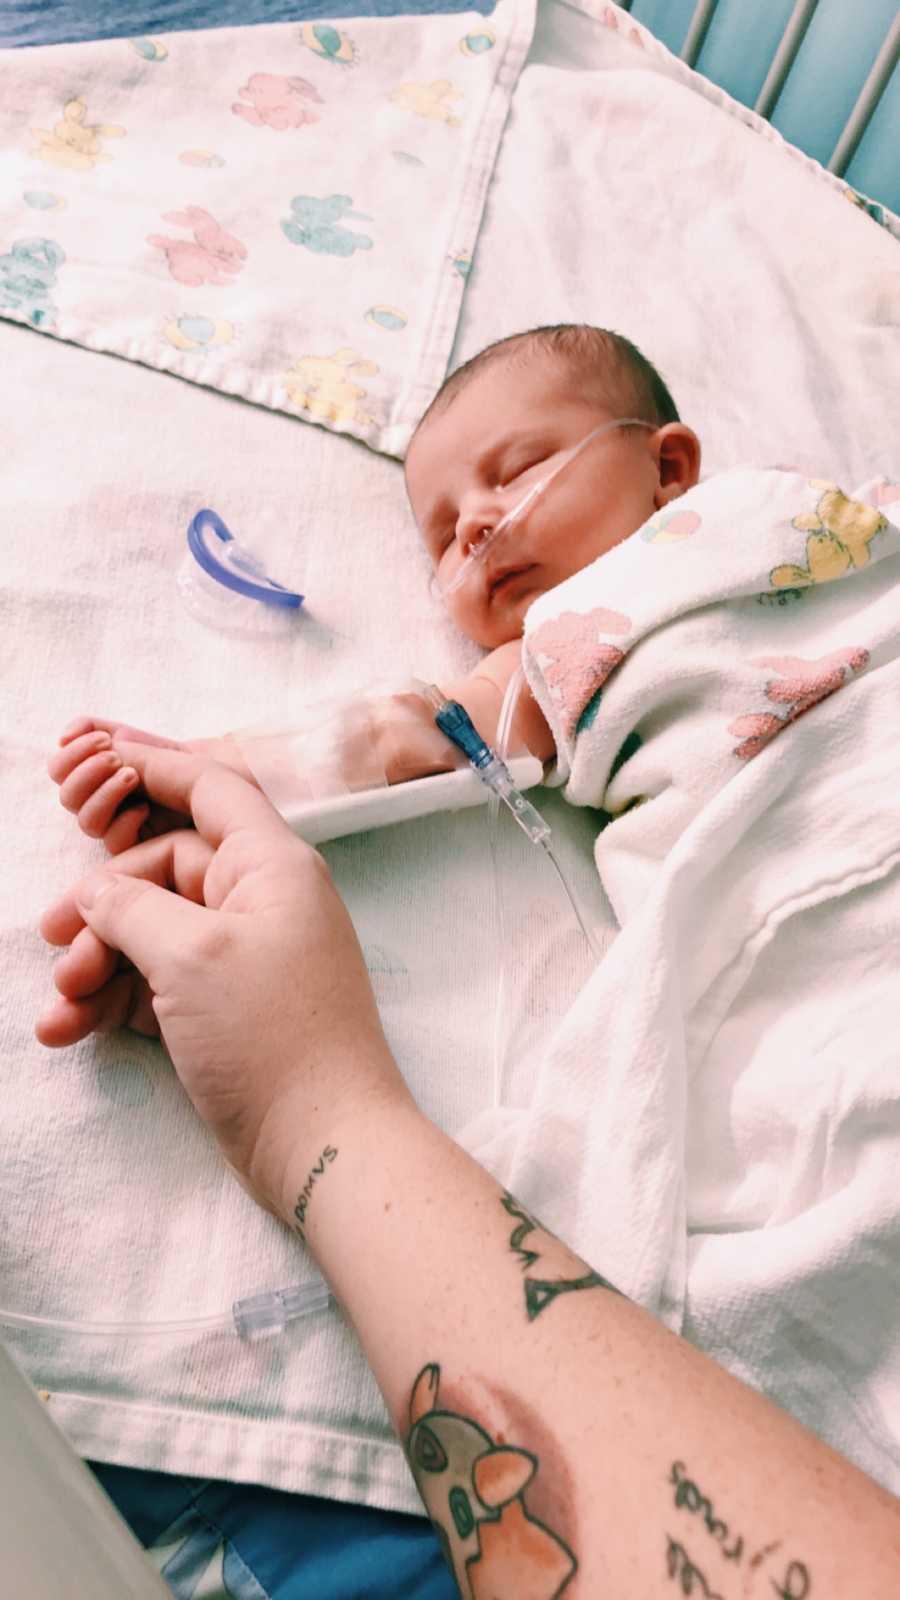 Baby on oxygen lays asleep in crib in NICU while holding mother's finger